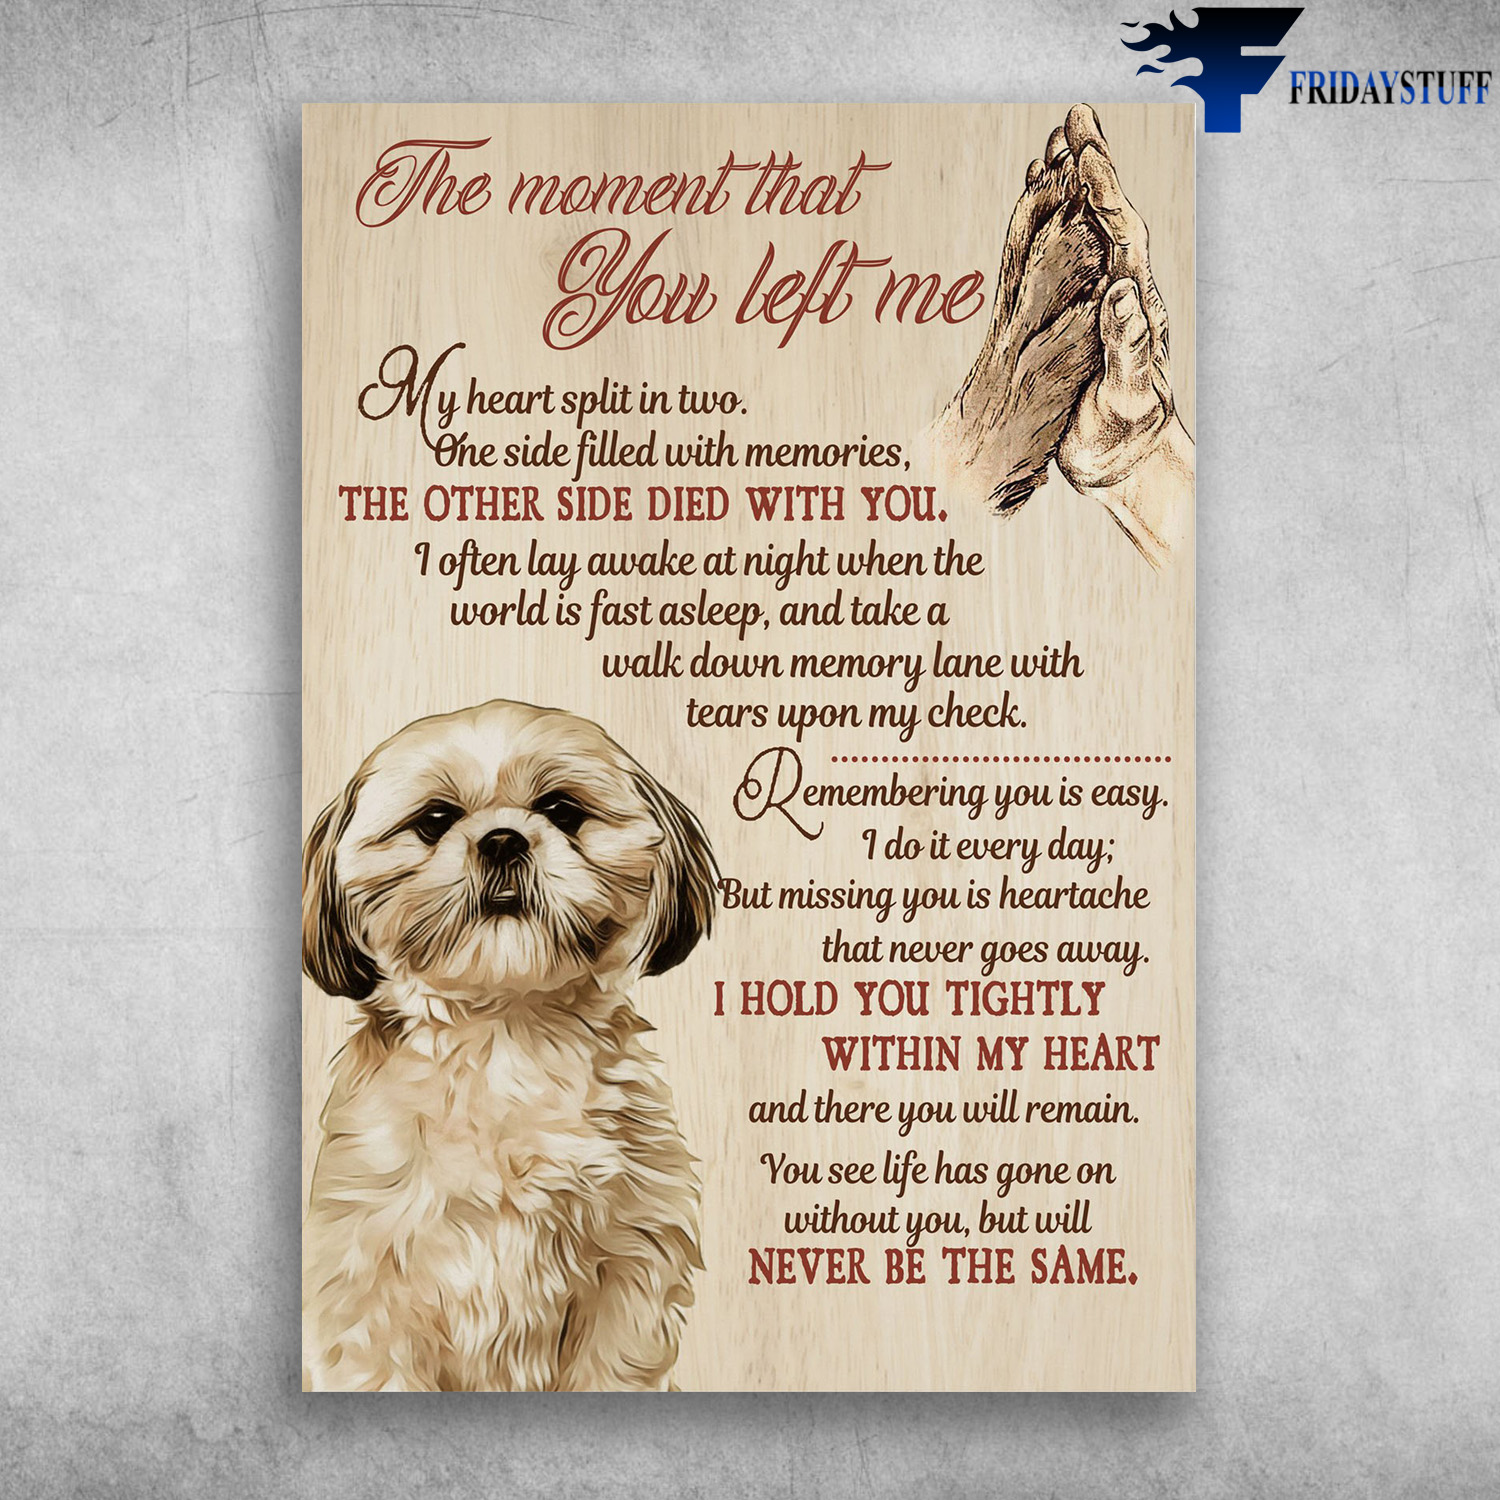 Shih Tzu Dog - The Moment That You Left Me, My Heart Split In Two, One Side Filled With Memories, The Other Side Died With You